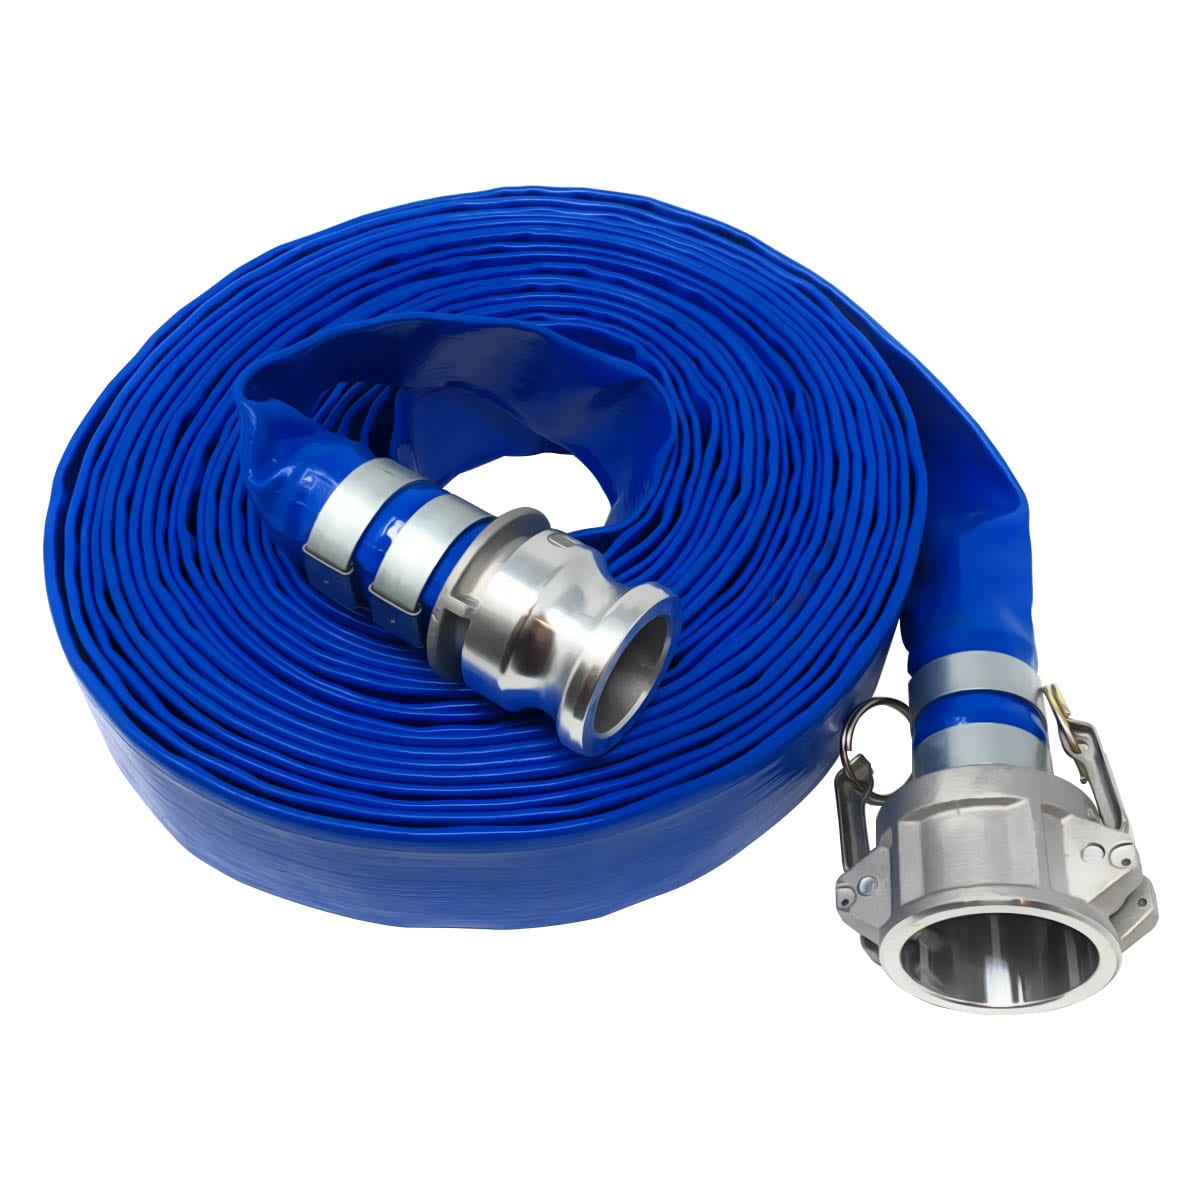 Details about   Sigma 1-1/2" 1.5" Inch X 300' Feet PVC Lay Flat Pump Discharge Hose & Camlocks 